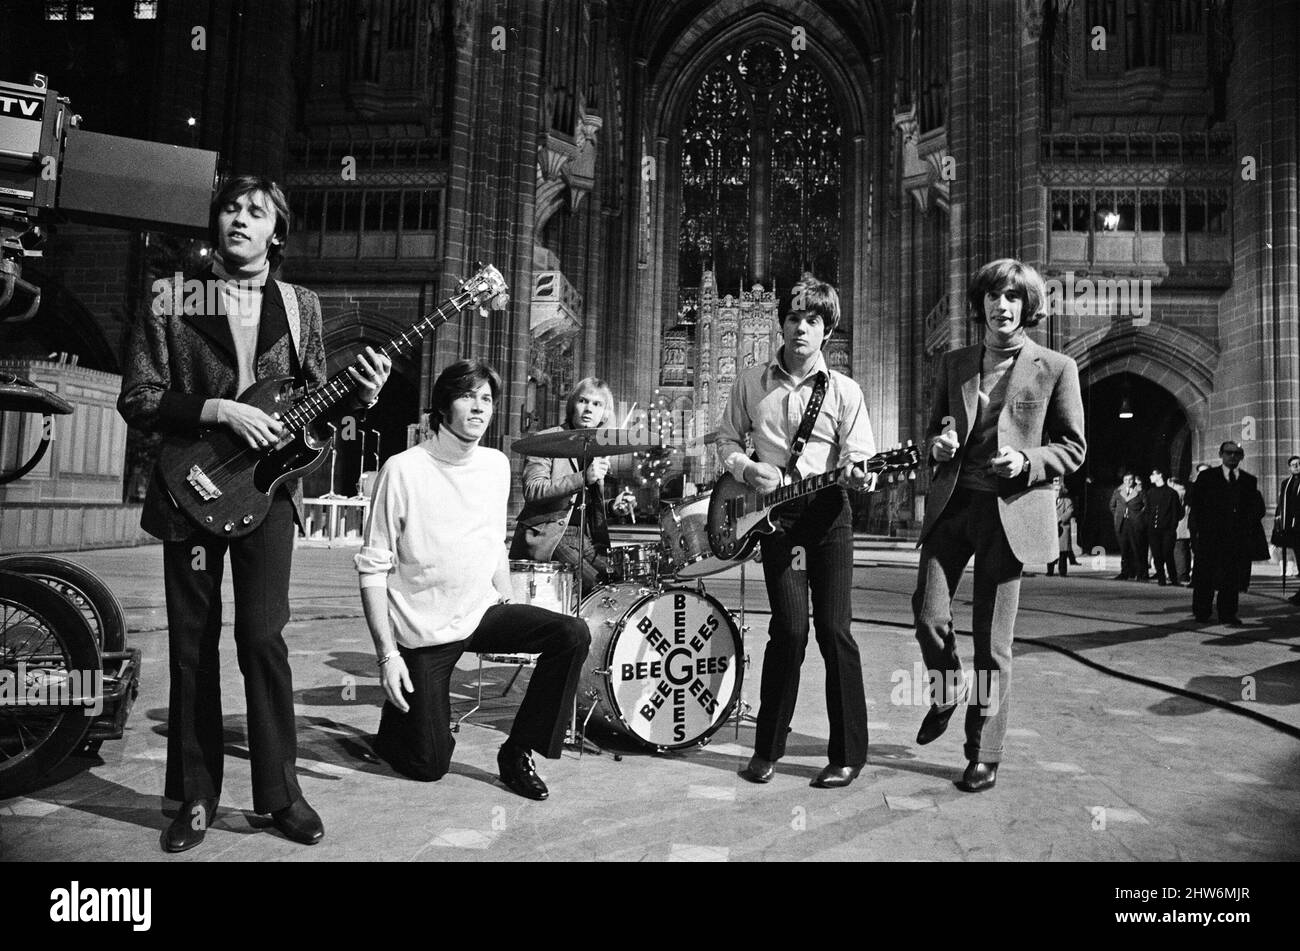 The Bee Gees perform at Liverpool Anglican Cathedral. The Bee Gees are brothers Maurice, Barry and Robin Gibb, Colin Peterson and Vince Malouney.  14th December 1967. Stock Photo